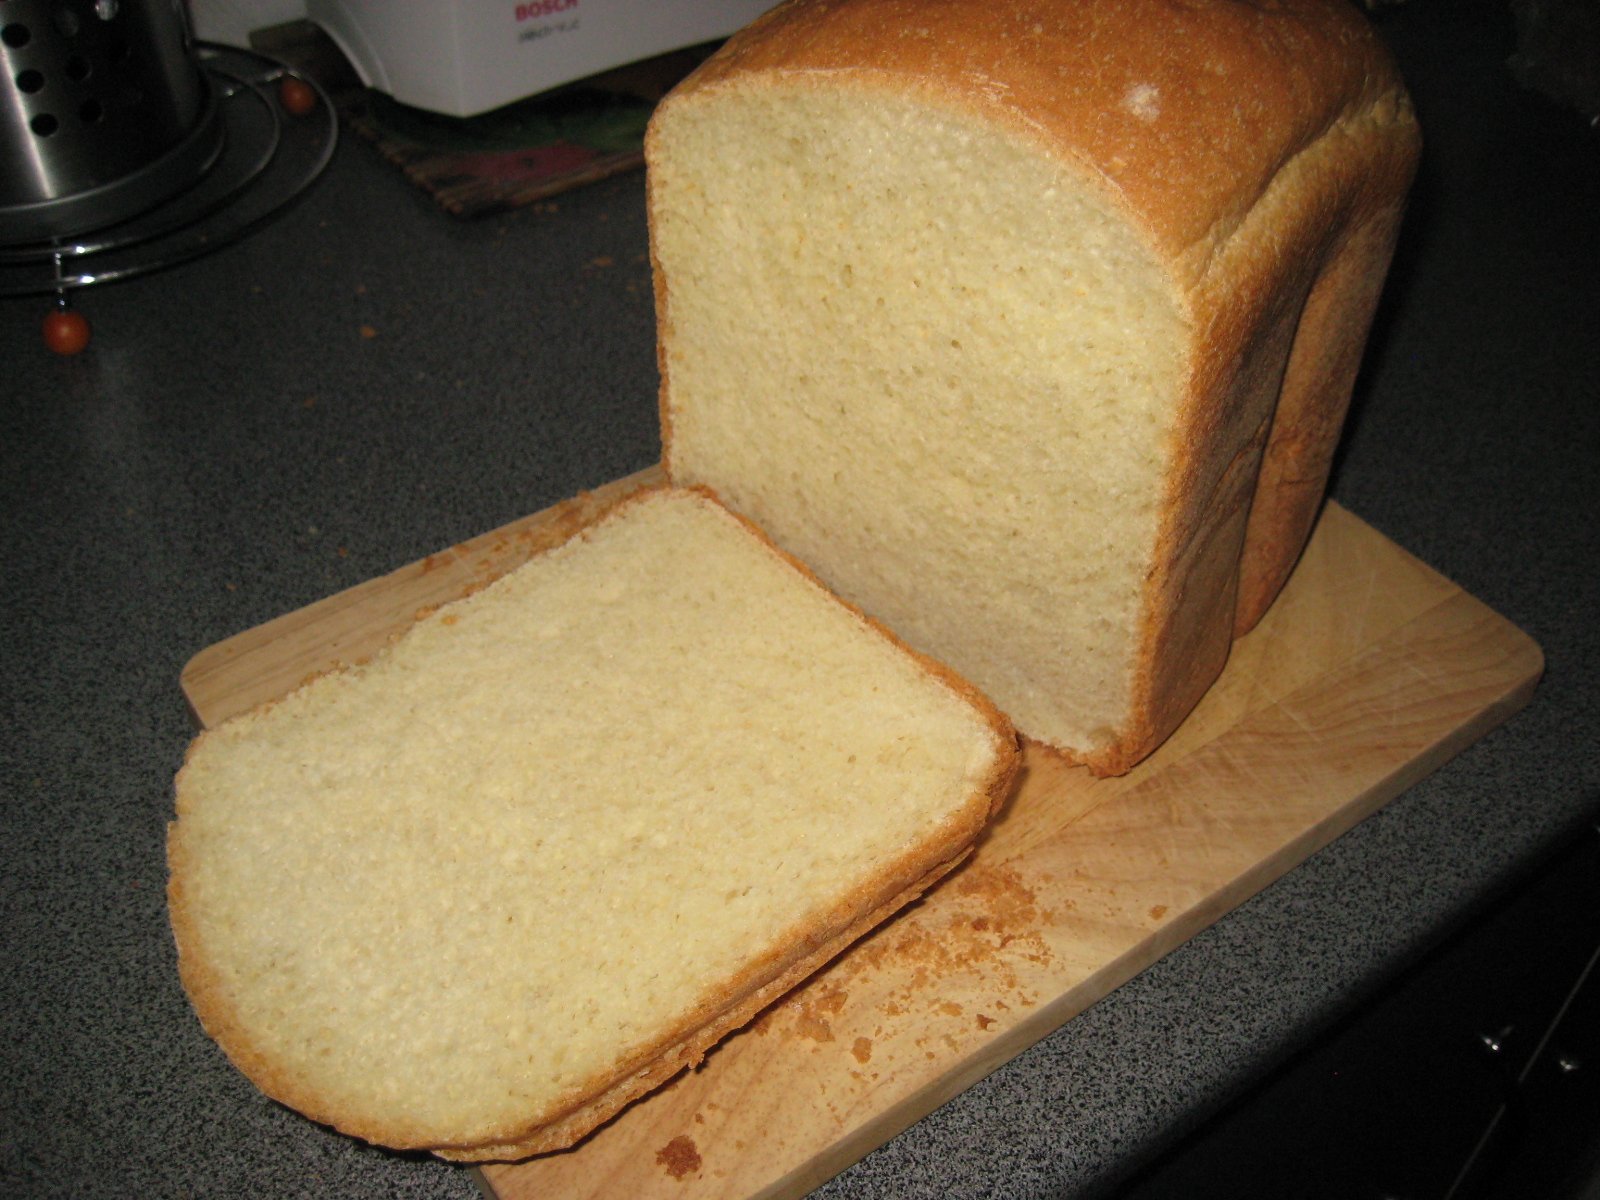 Mustard bread according to GOST